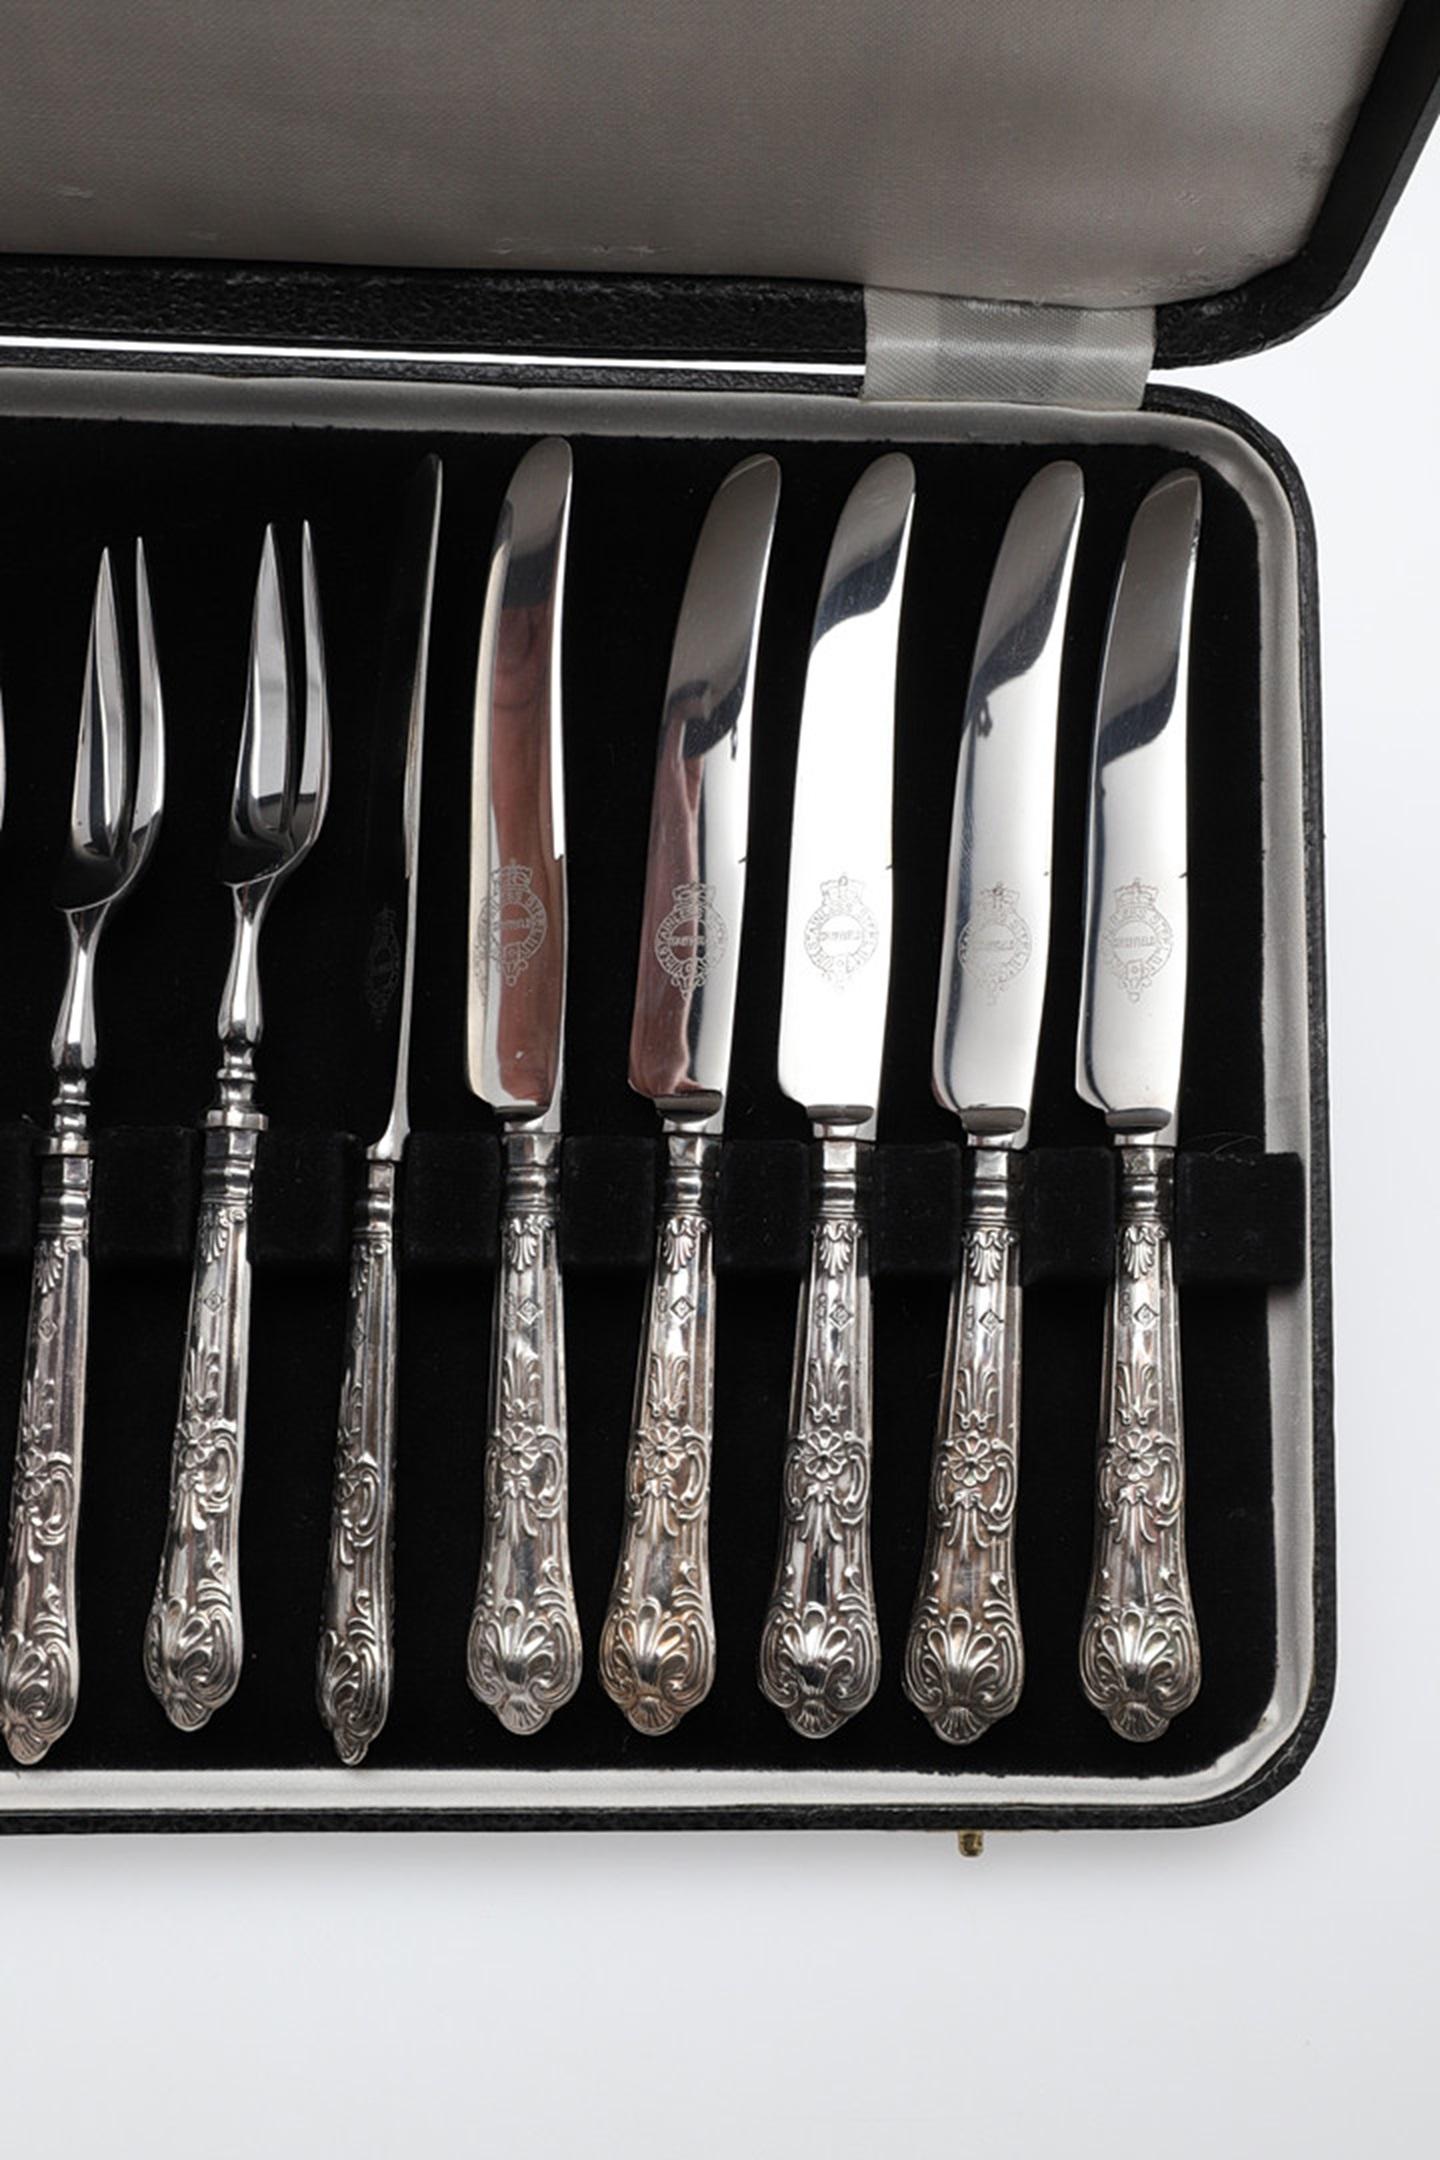 English Exclusive Knife and Fork Set, 12 pcs. Sterling Silver & Box, A CASE DESSERT SET For Sale